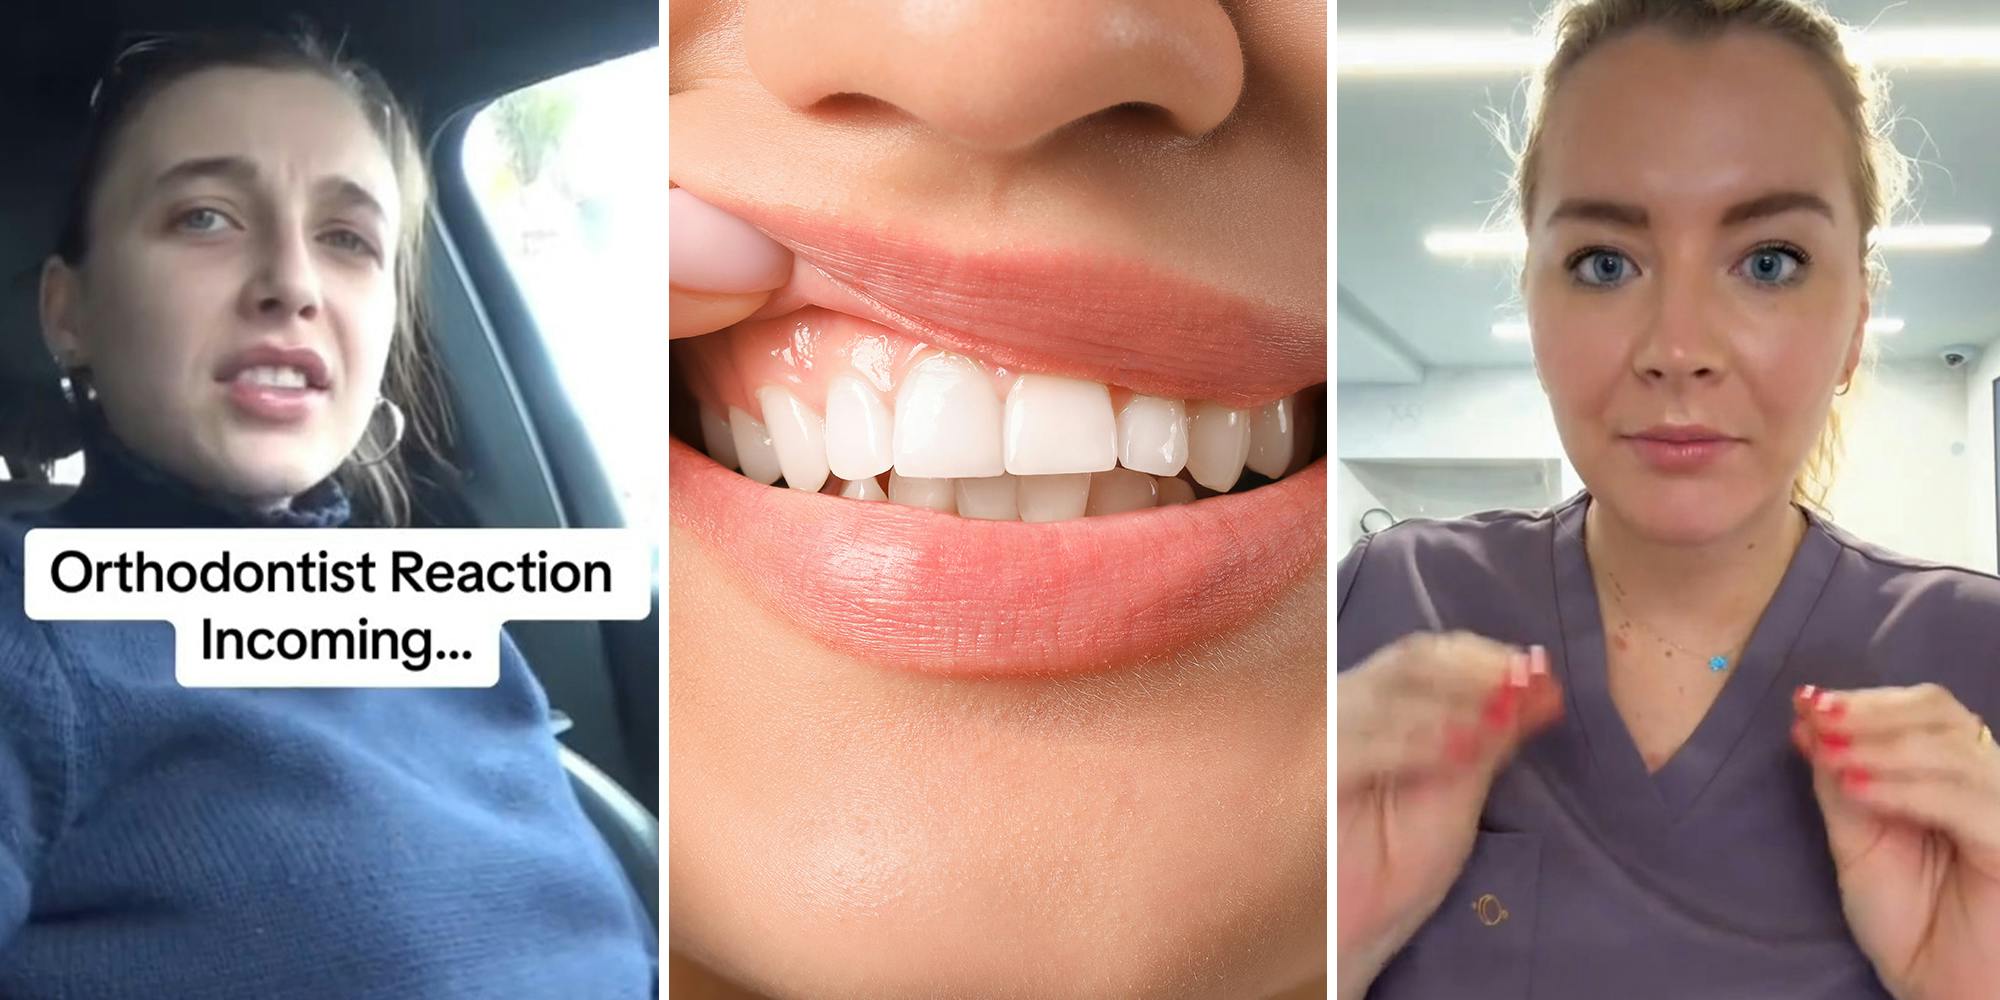 ‘This is your sign to stop’: Expert issues warning on how Zyn can affect your gums after Emma Chamberlain speaks out about dental problems